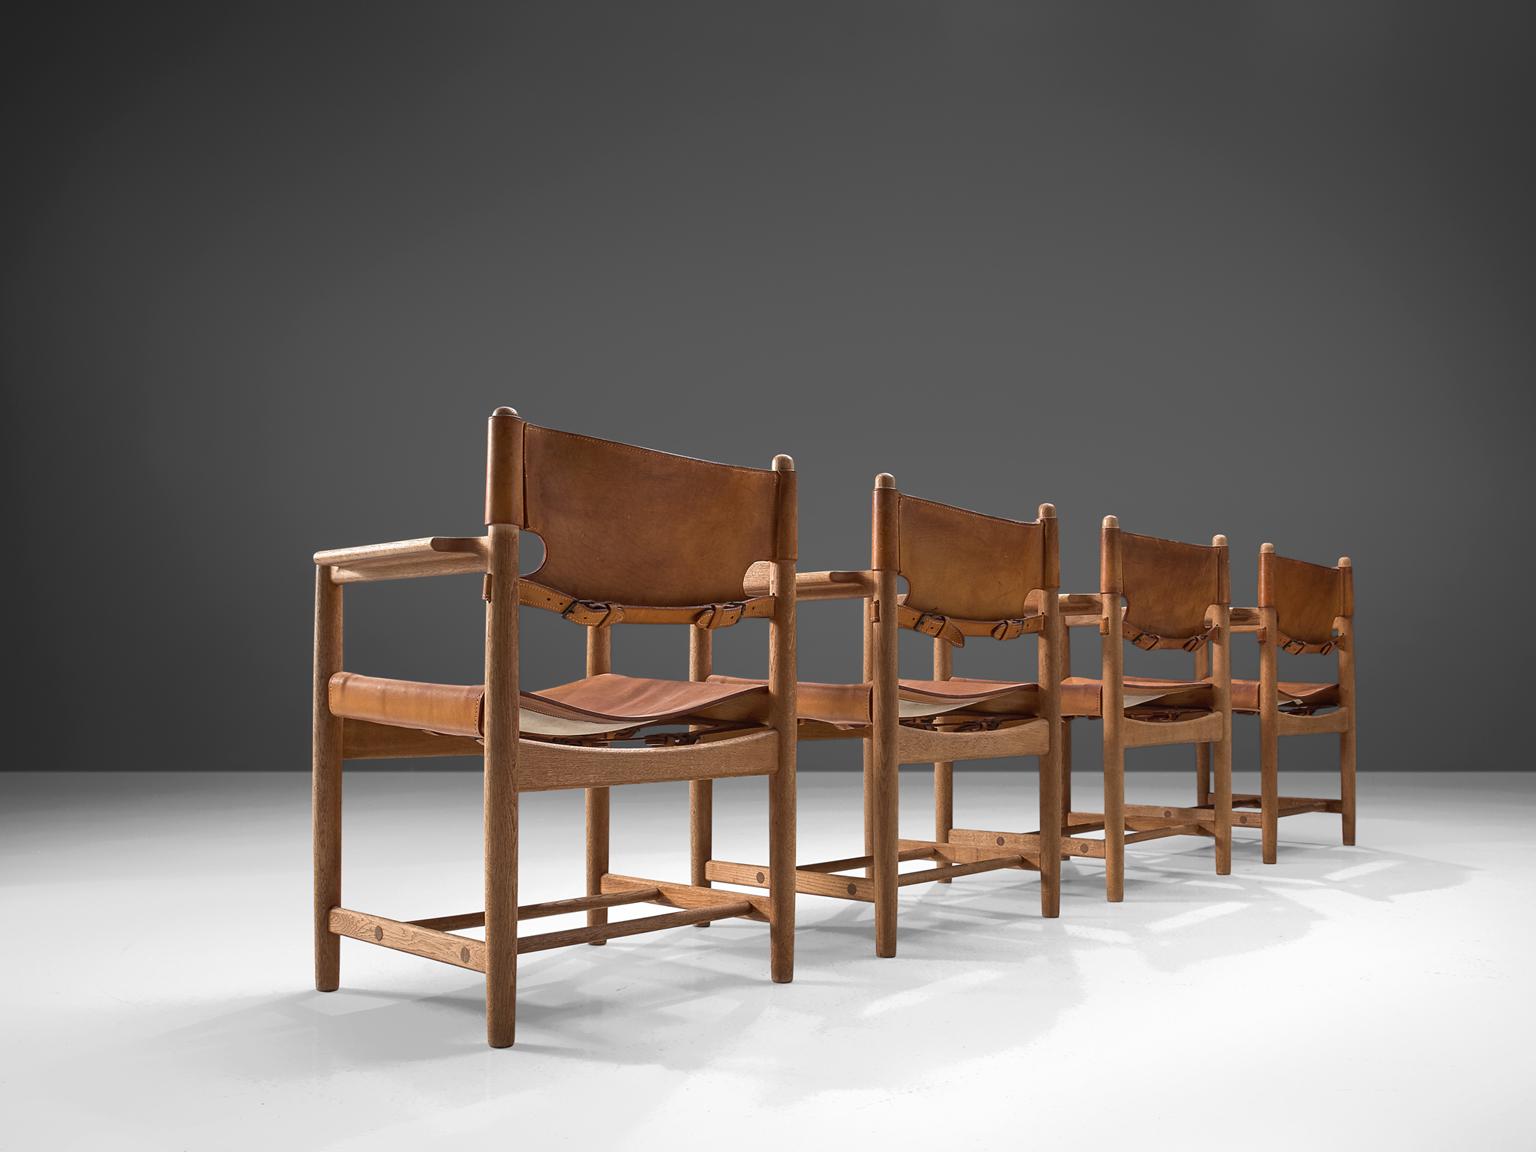 Børge Mogensen for Fredericia Stolefabrik, set of 4 chairs model 3238, in oak and leather, Denmark, 1964. 

Set of four armchairs in solid oak. These chairs remind of the classical foldable 'director-chairs', yet this design by Danish designer